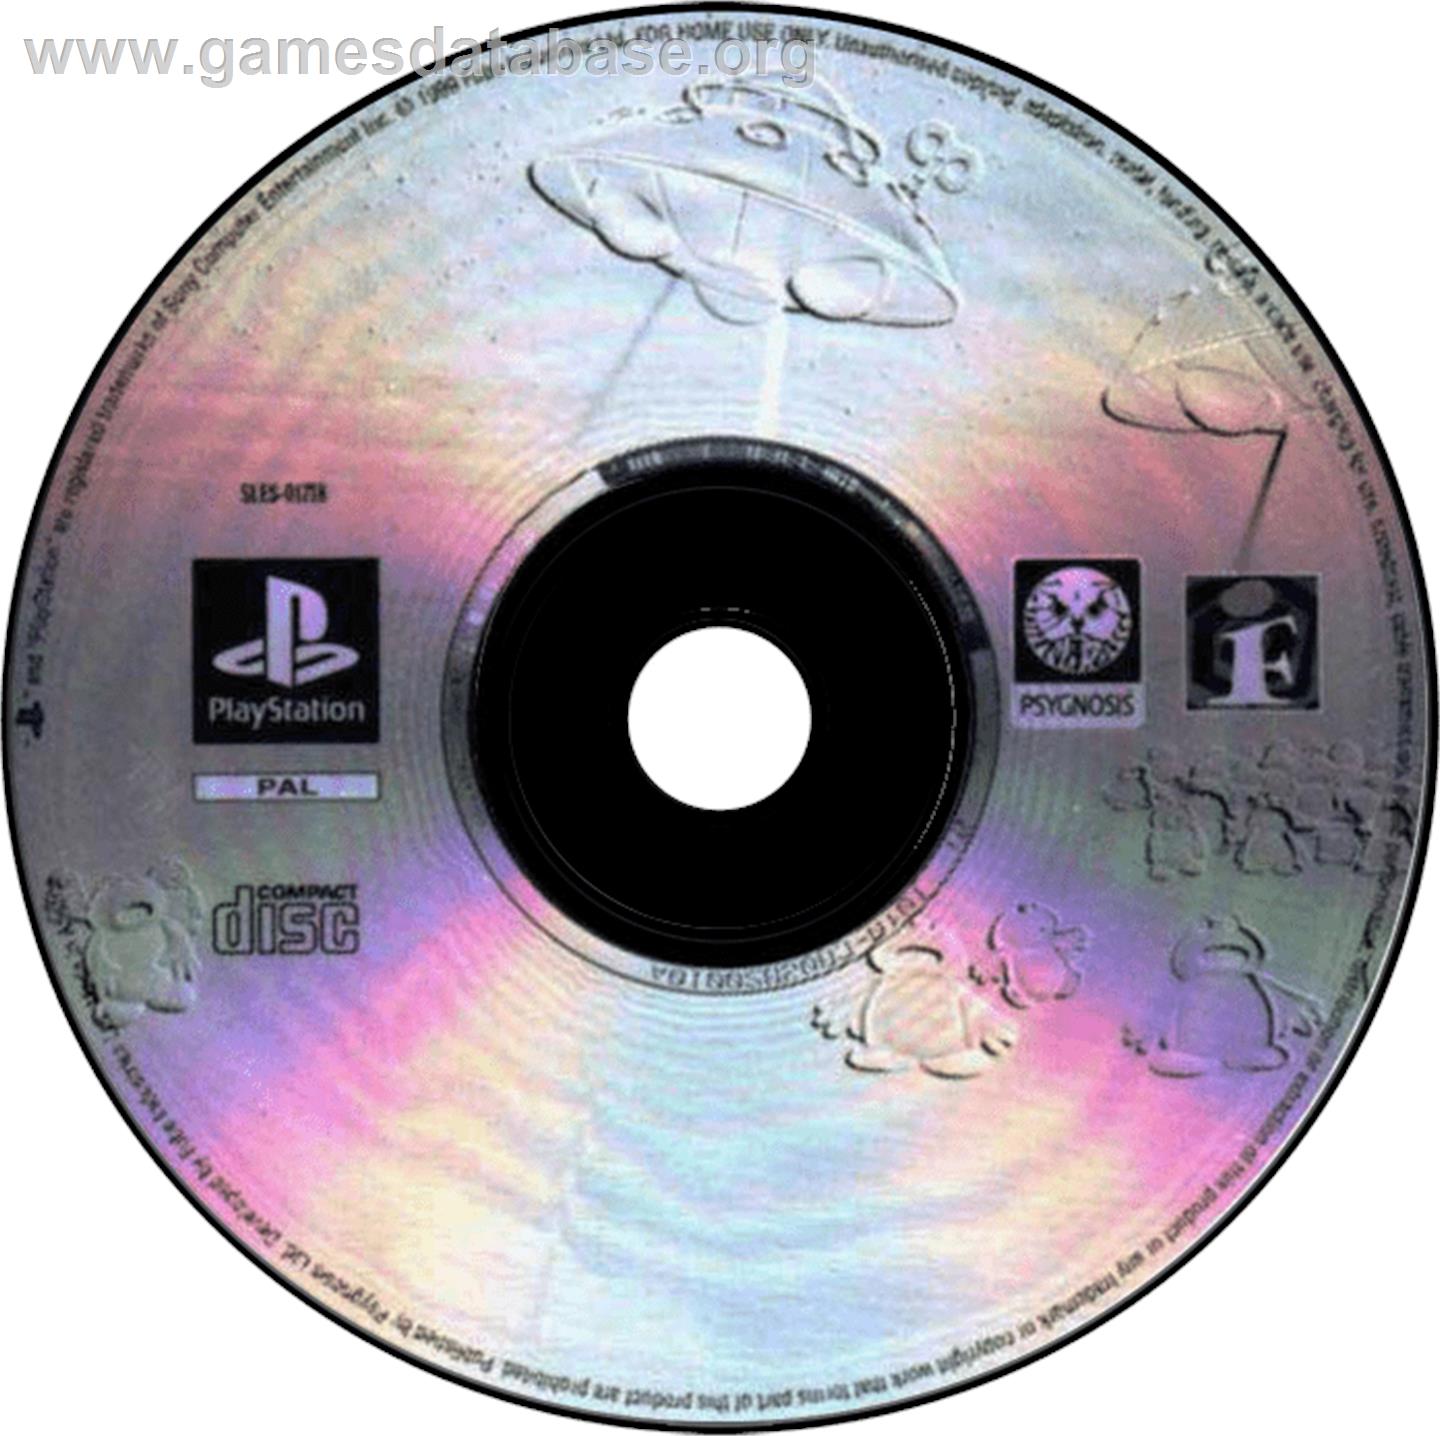 Attack of the Saucerman - Sony Playstation - Artwork - Disc